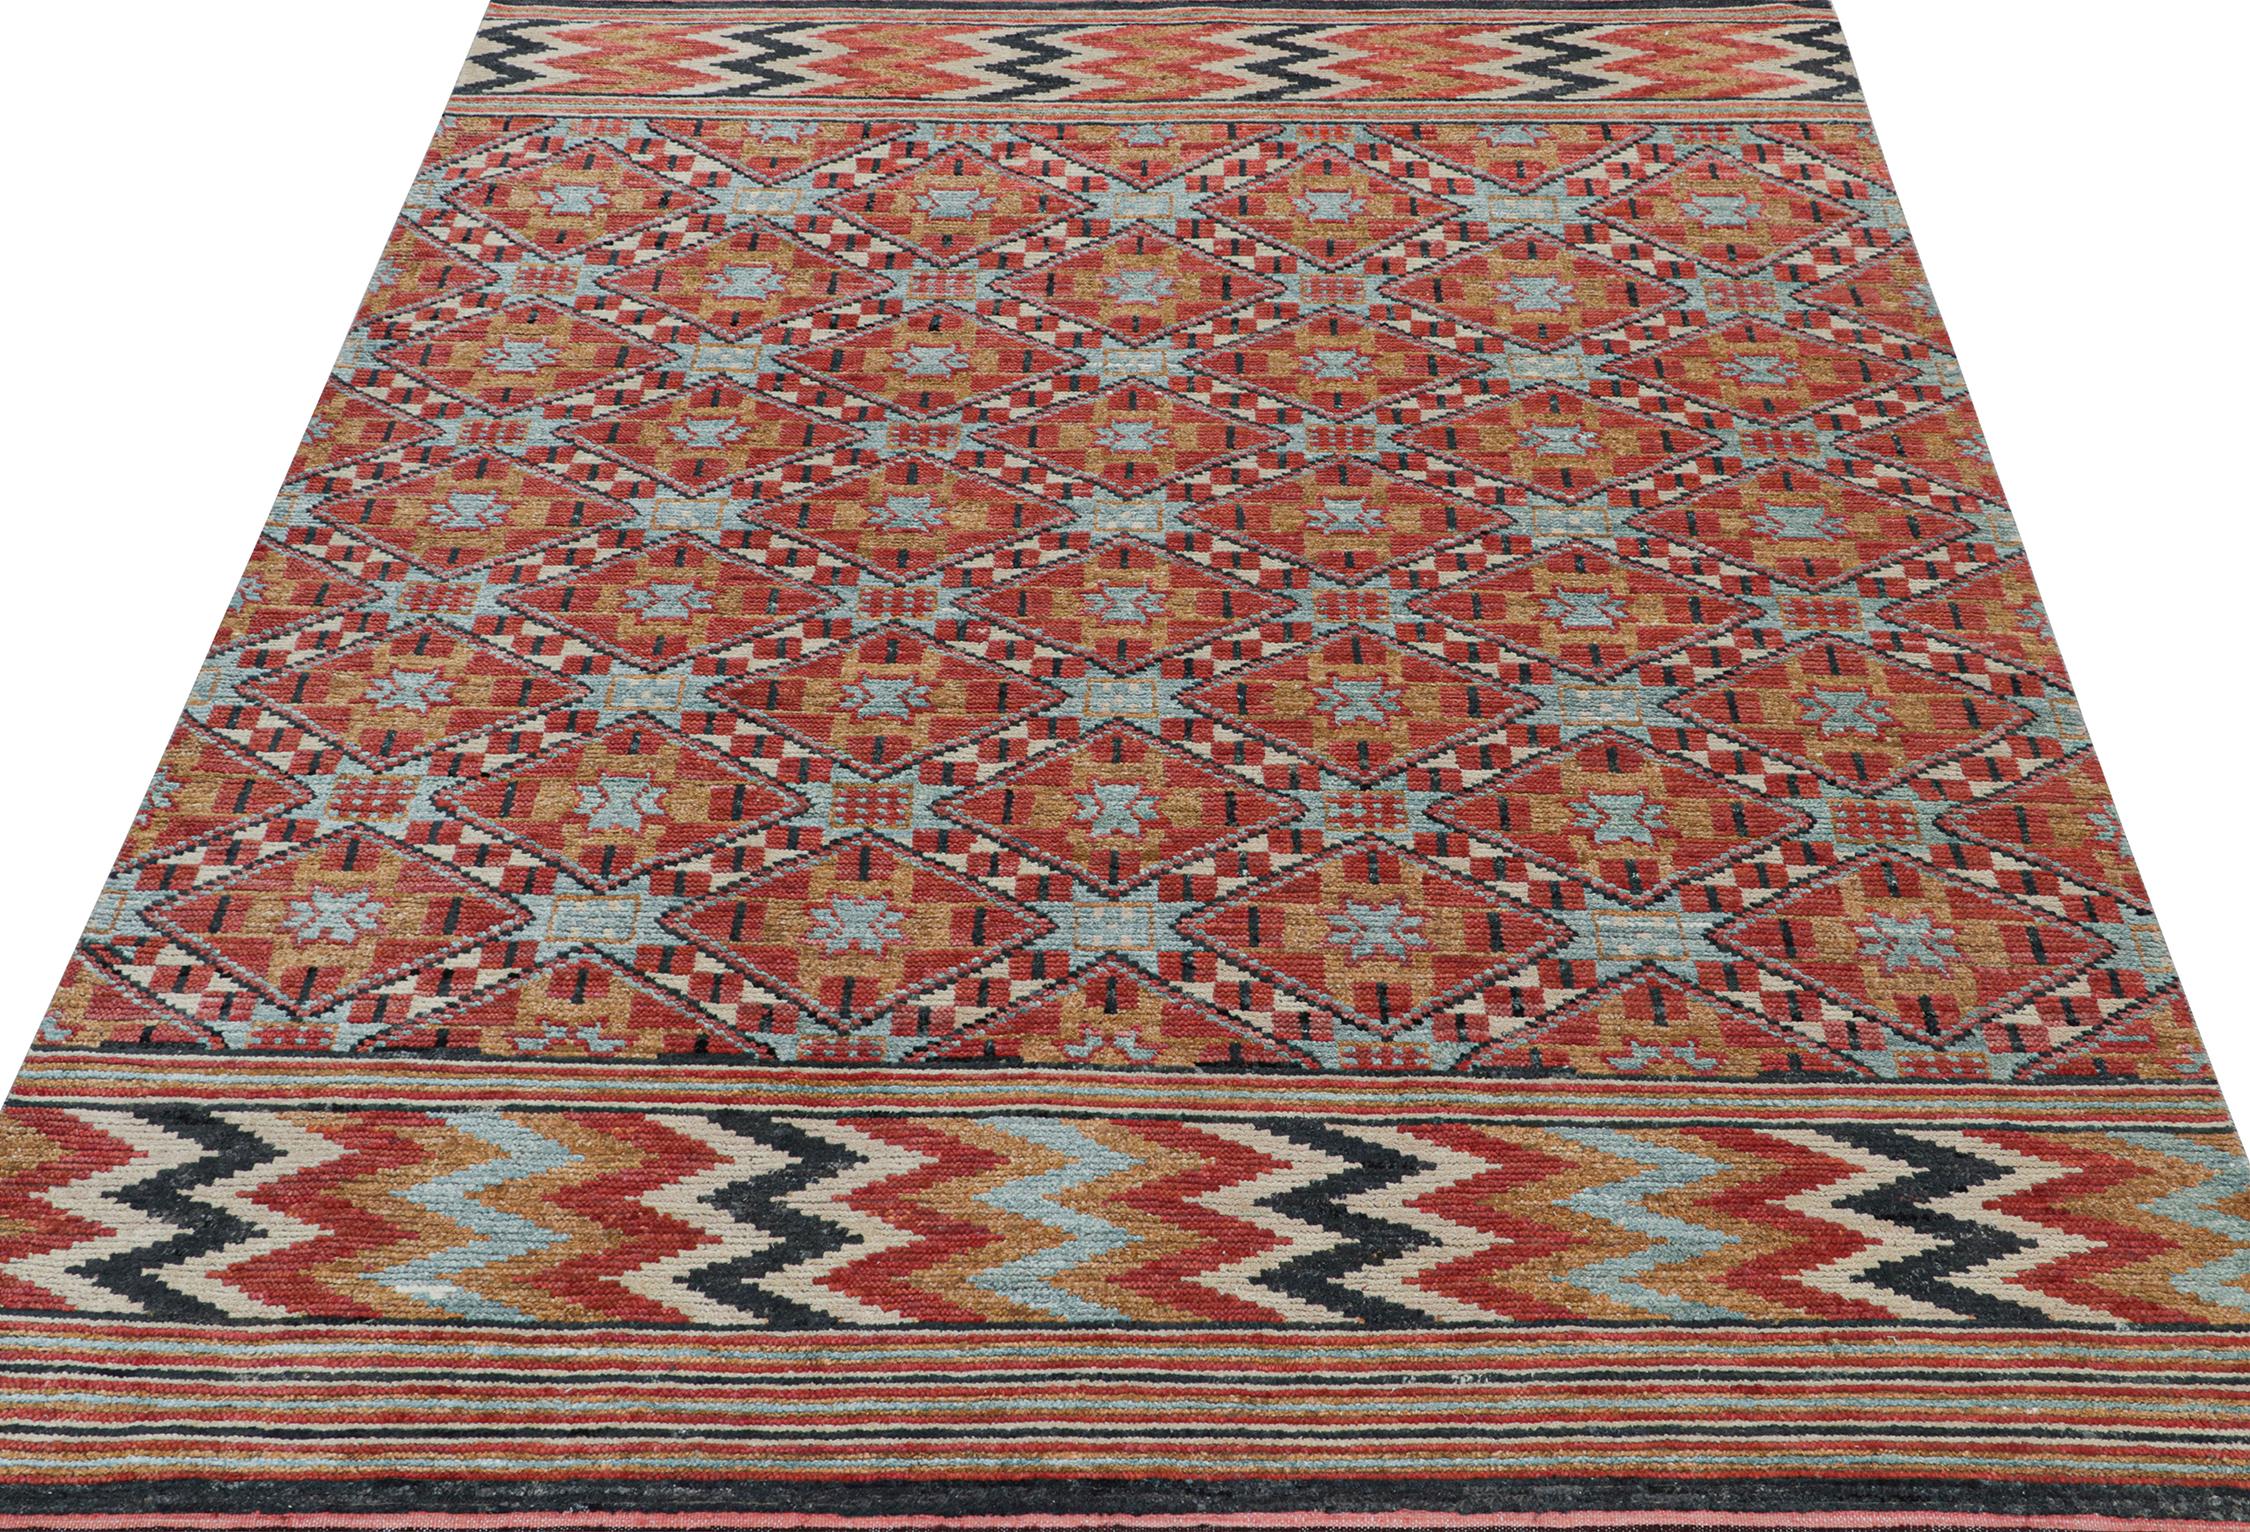 This contemporary 8x10 rug is a grand entry in Rug & Kilim's new Moroccan Collection—a bold take on the iconic style. Hand-knotted in wool, silk, and cotton.
Further on the Design:
The piece draws on archaic cross patterns and geometry in rich